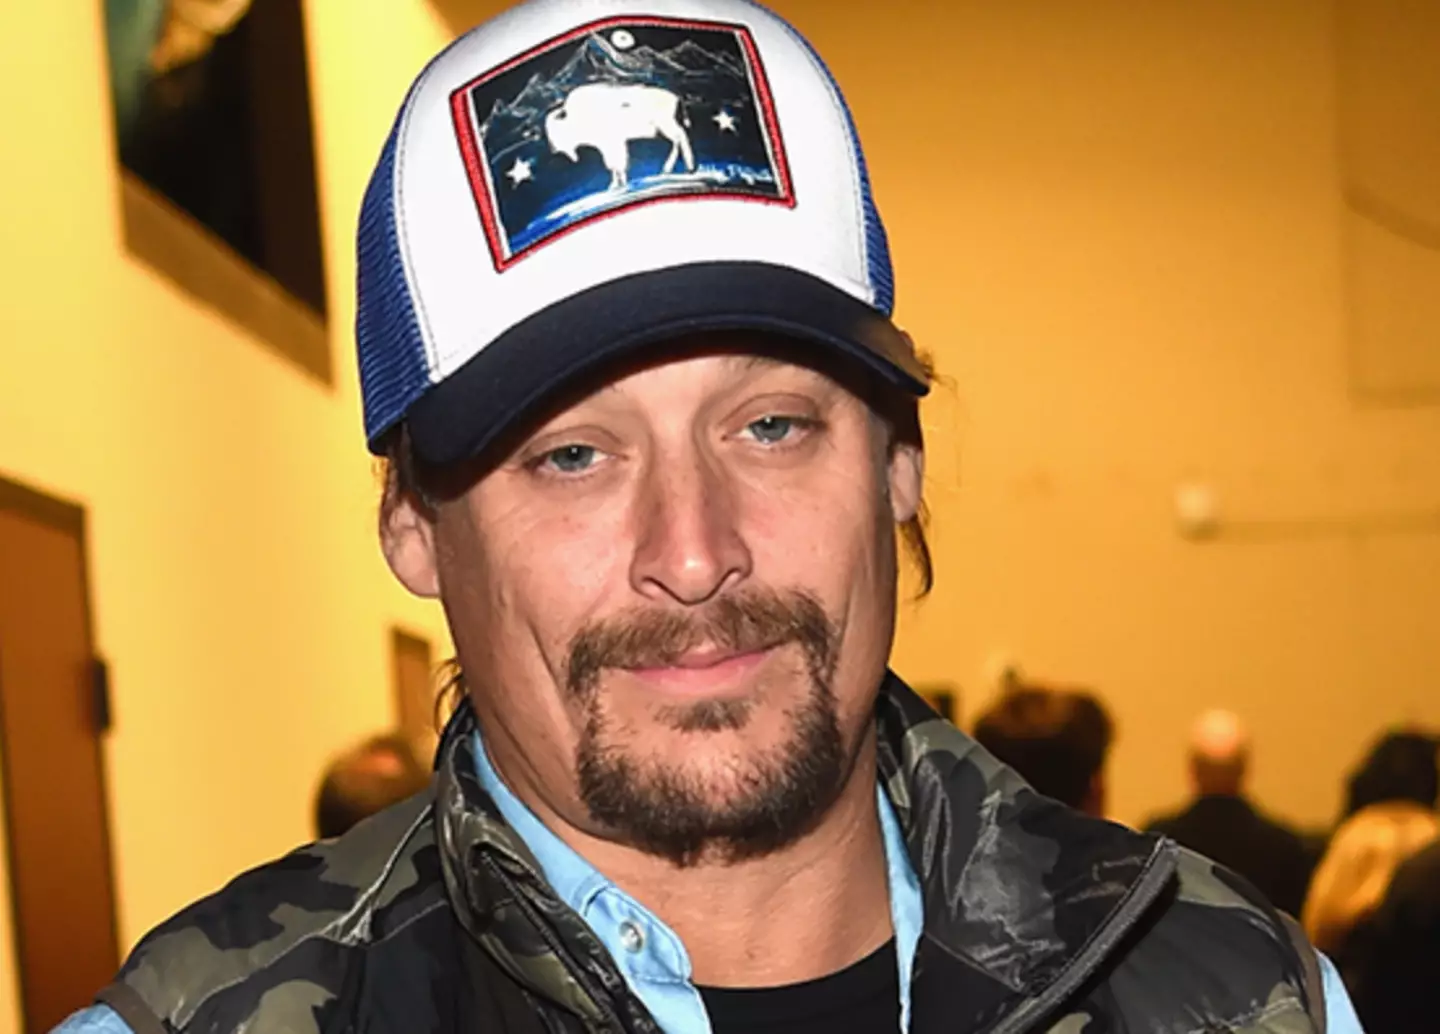 Kid Rock has been open about his Republican stance. (Rick Diamond/Getty Images)